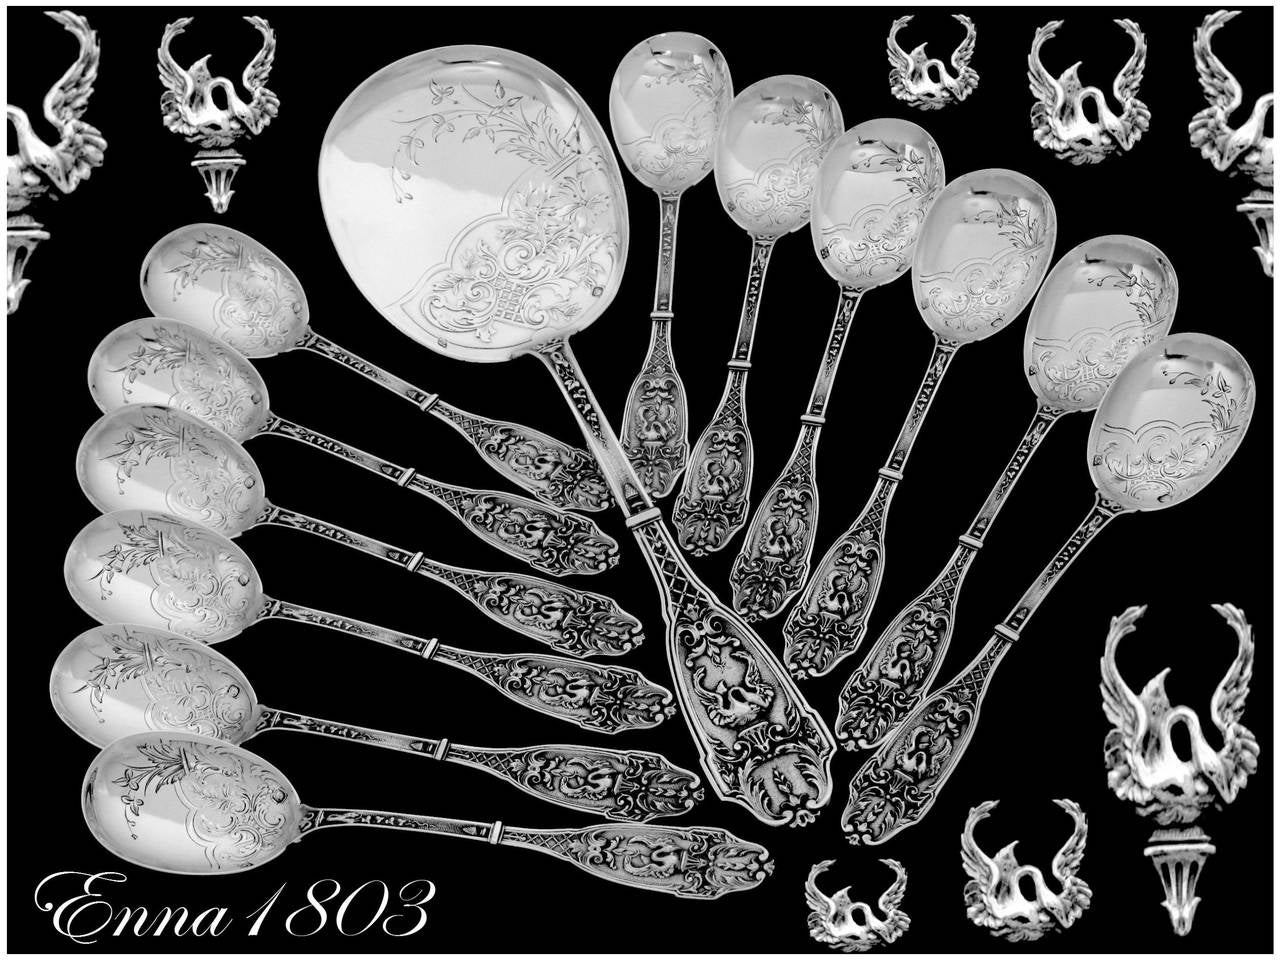 Boivin Fabulous French All Sterling Silver Ice Cream Set 13 pc Swans

Head of Minerve 1 st titre for 950/1000 French Sterling Silver guarantee

Finesse of design and quality of execution rarely seen for this set. The upper parts are engraved